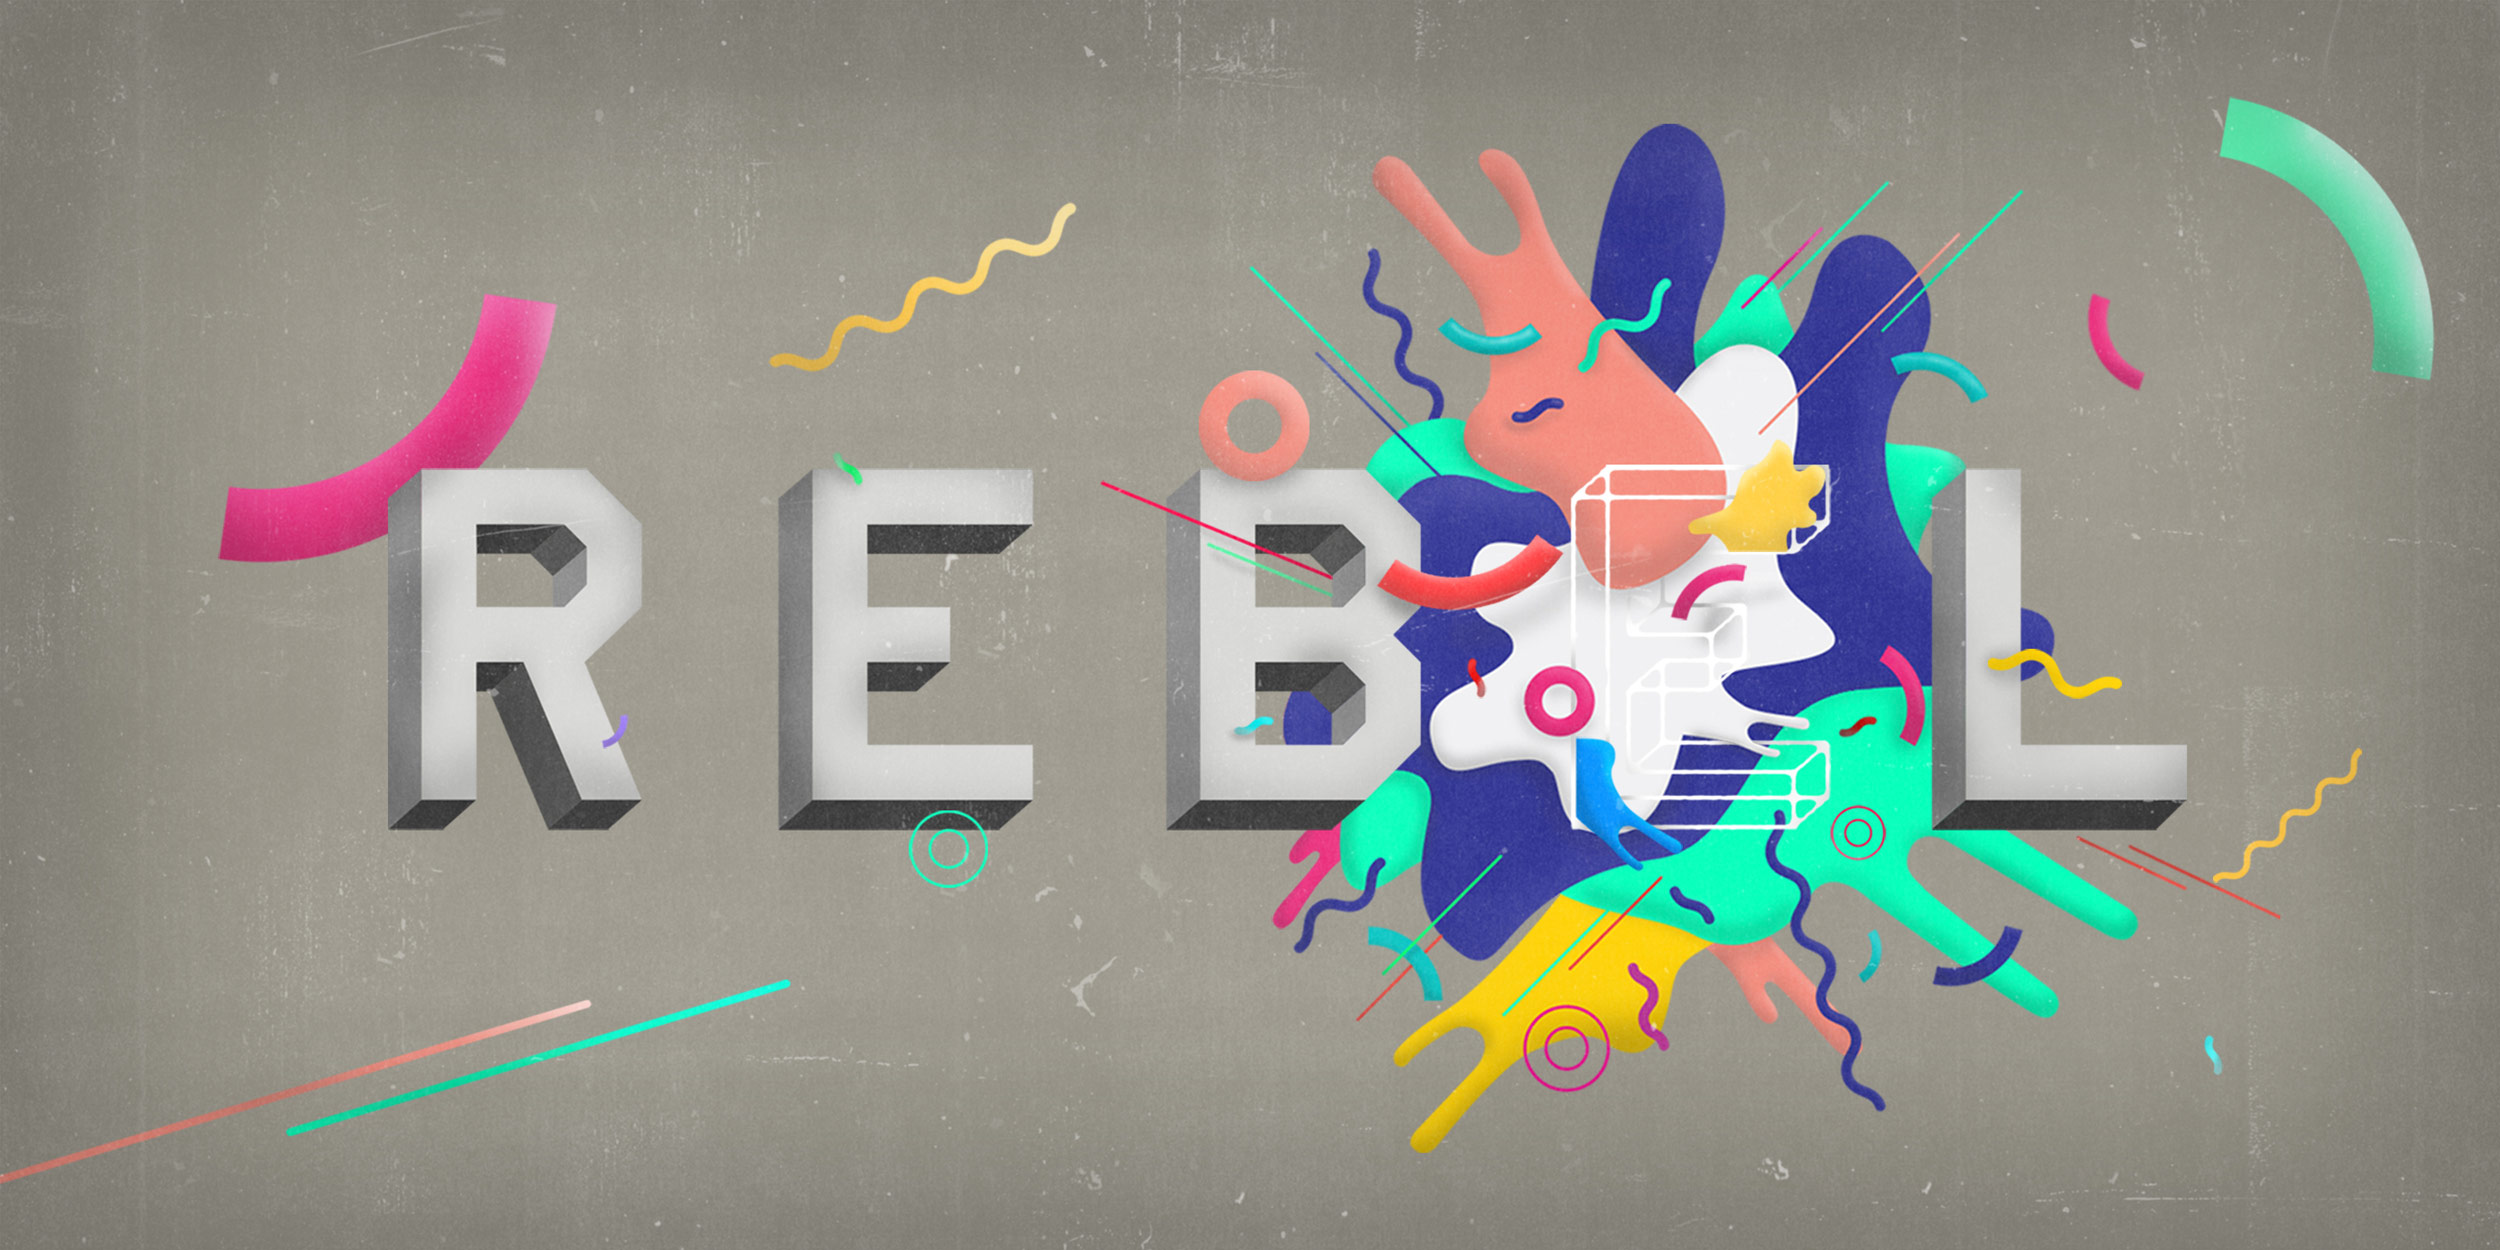 Rebel: Illustrated monthly theme for CreativeMornings